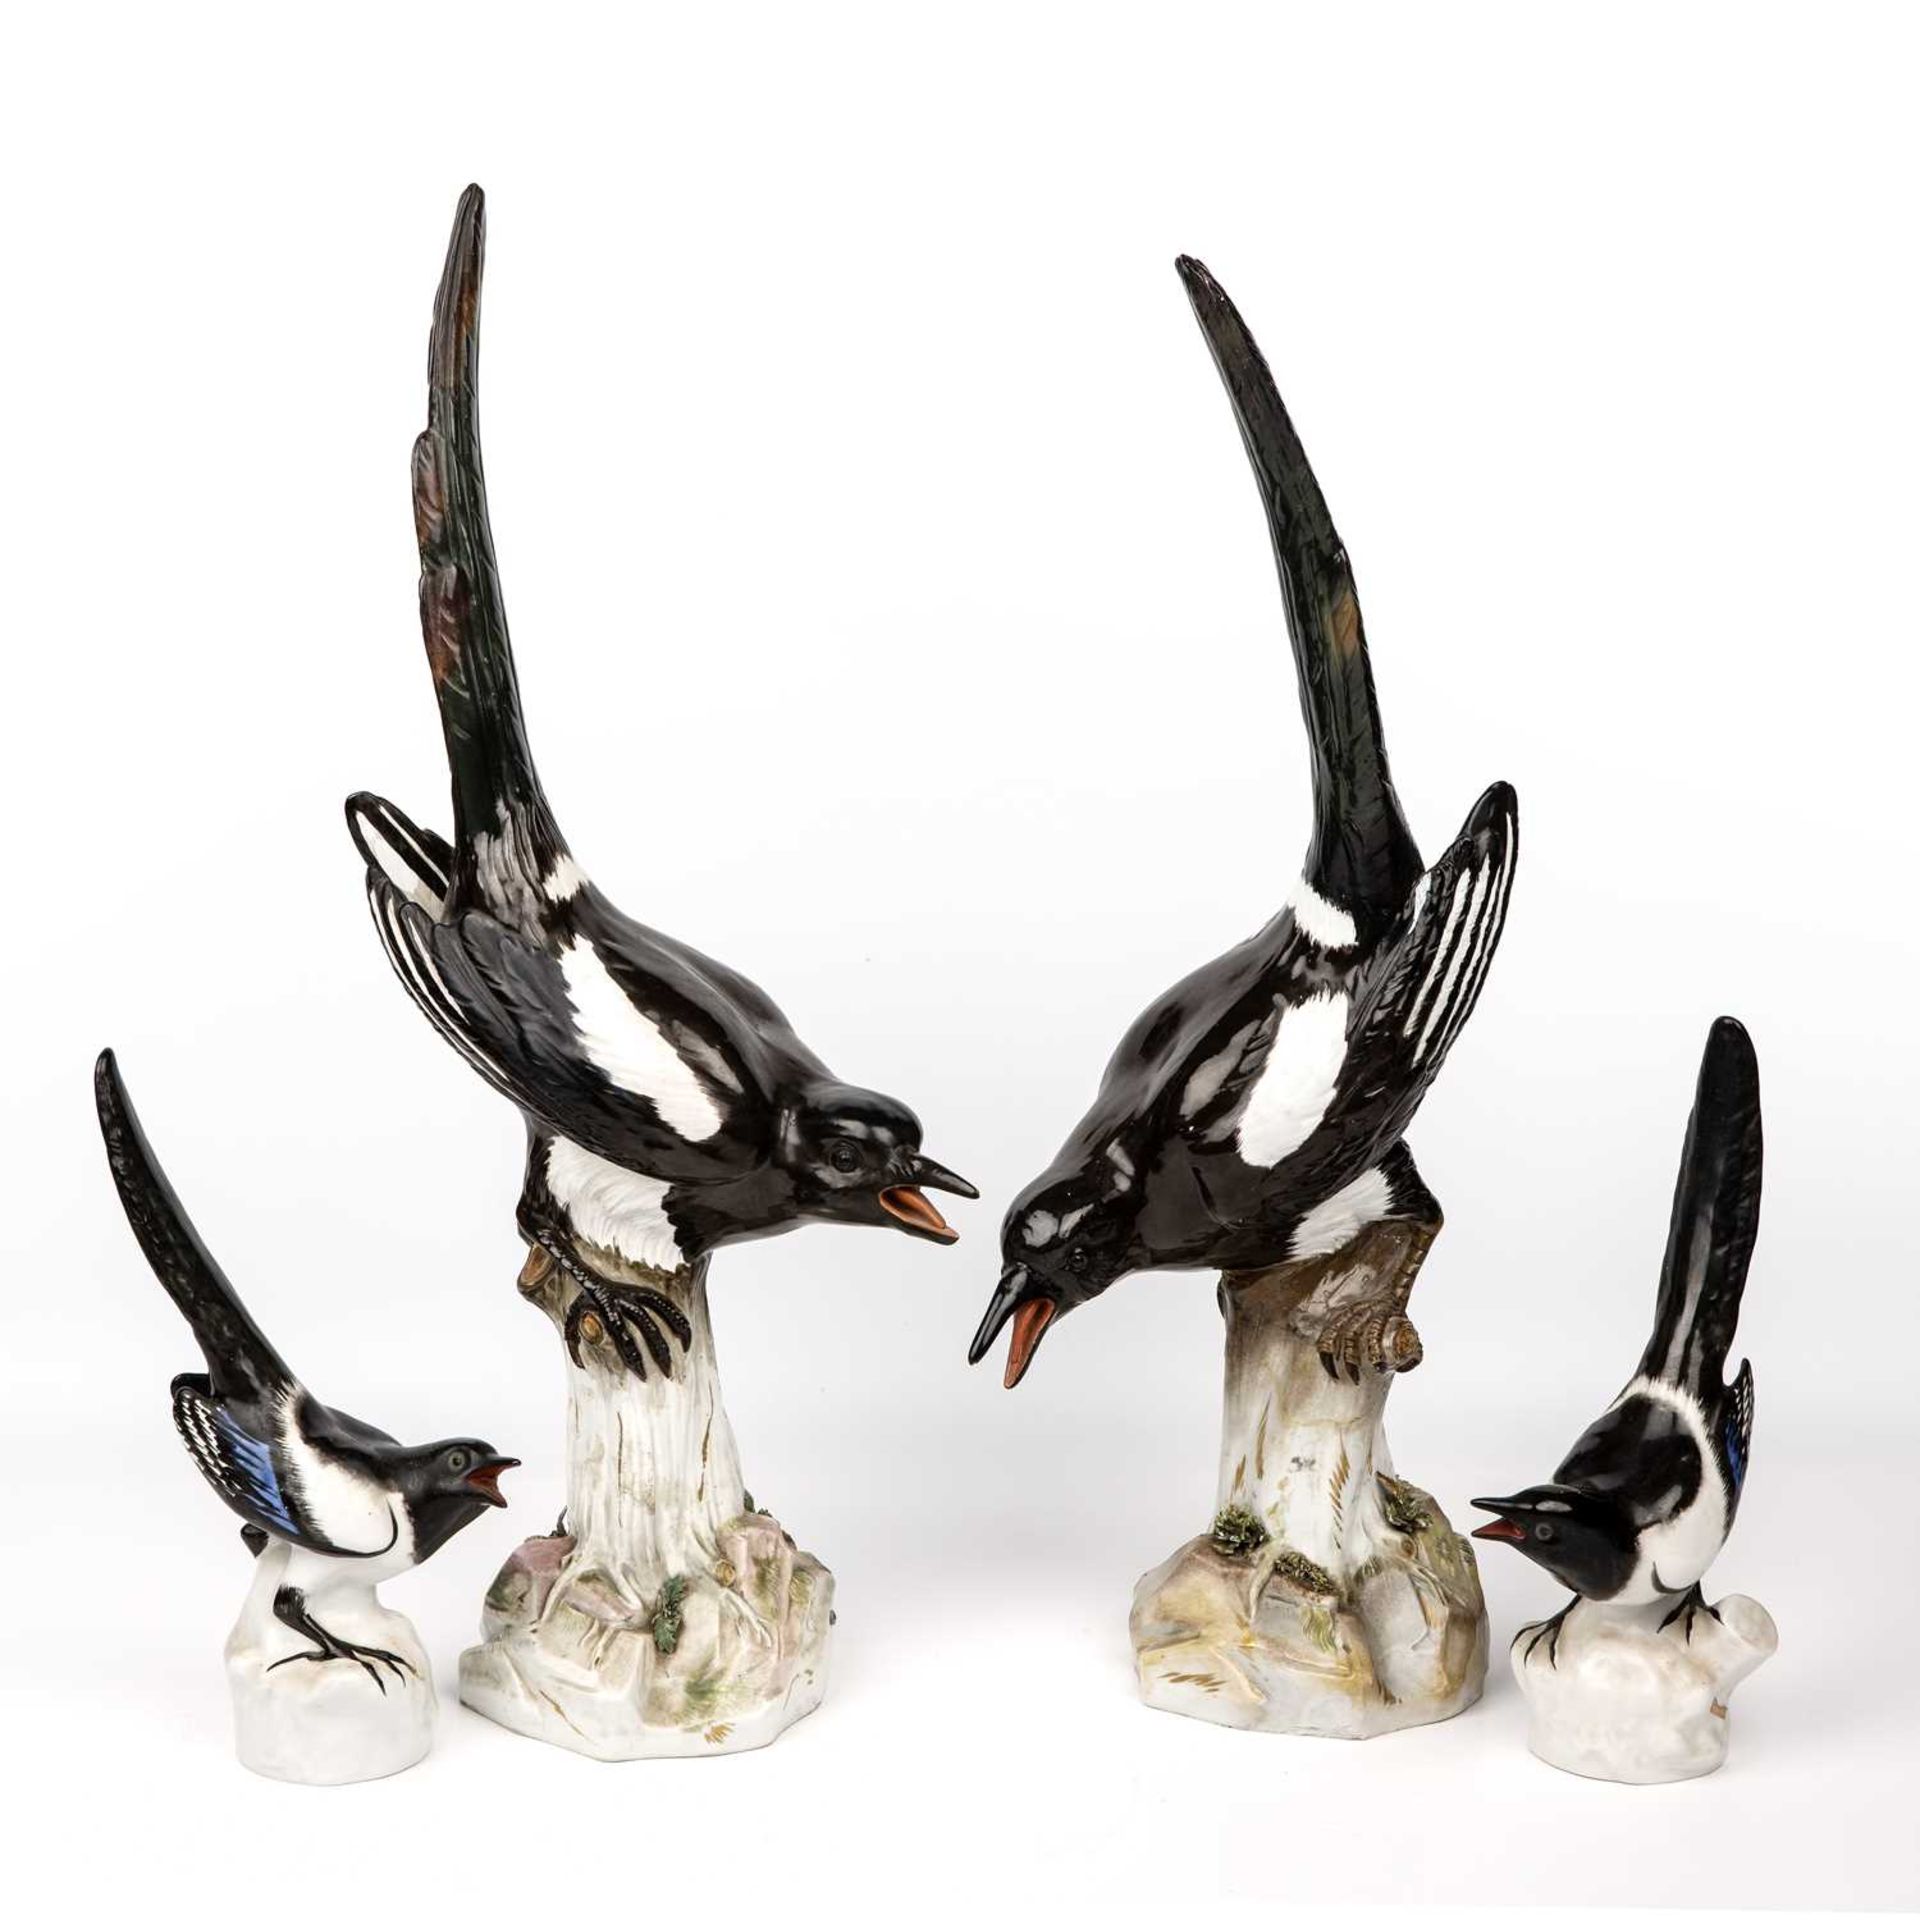 A pair of late 19th century Meissen magpies , blue crossed swords mark D 62a and 62b, after the